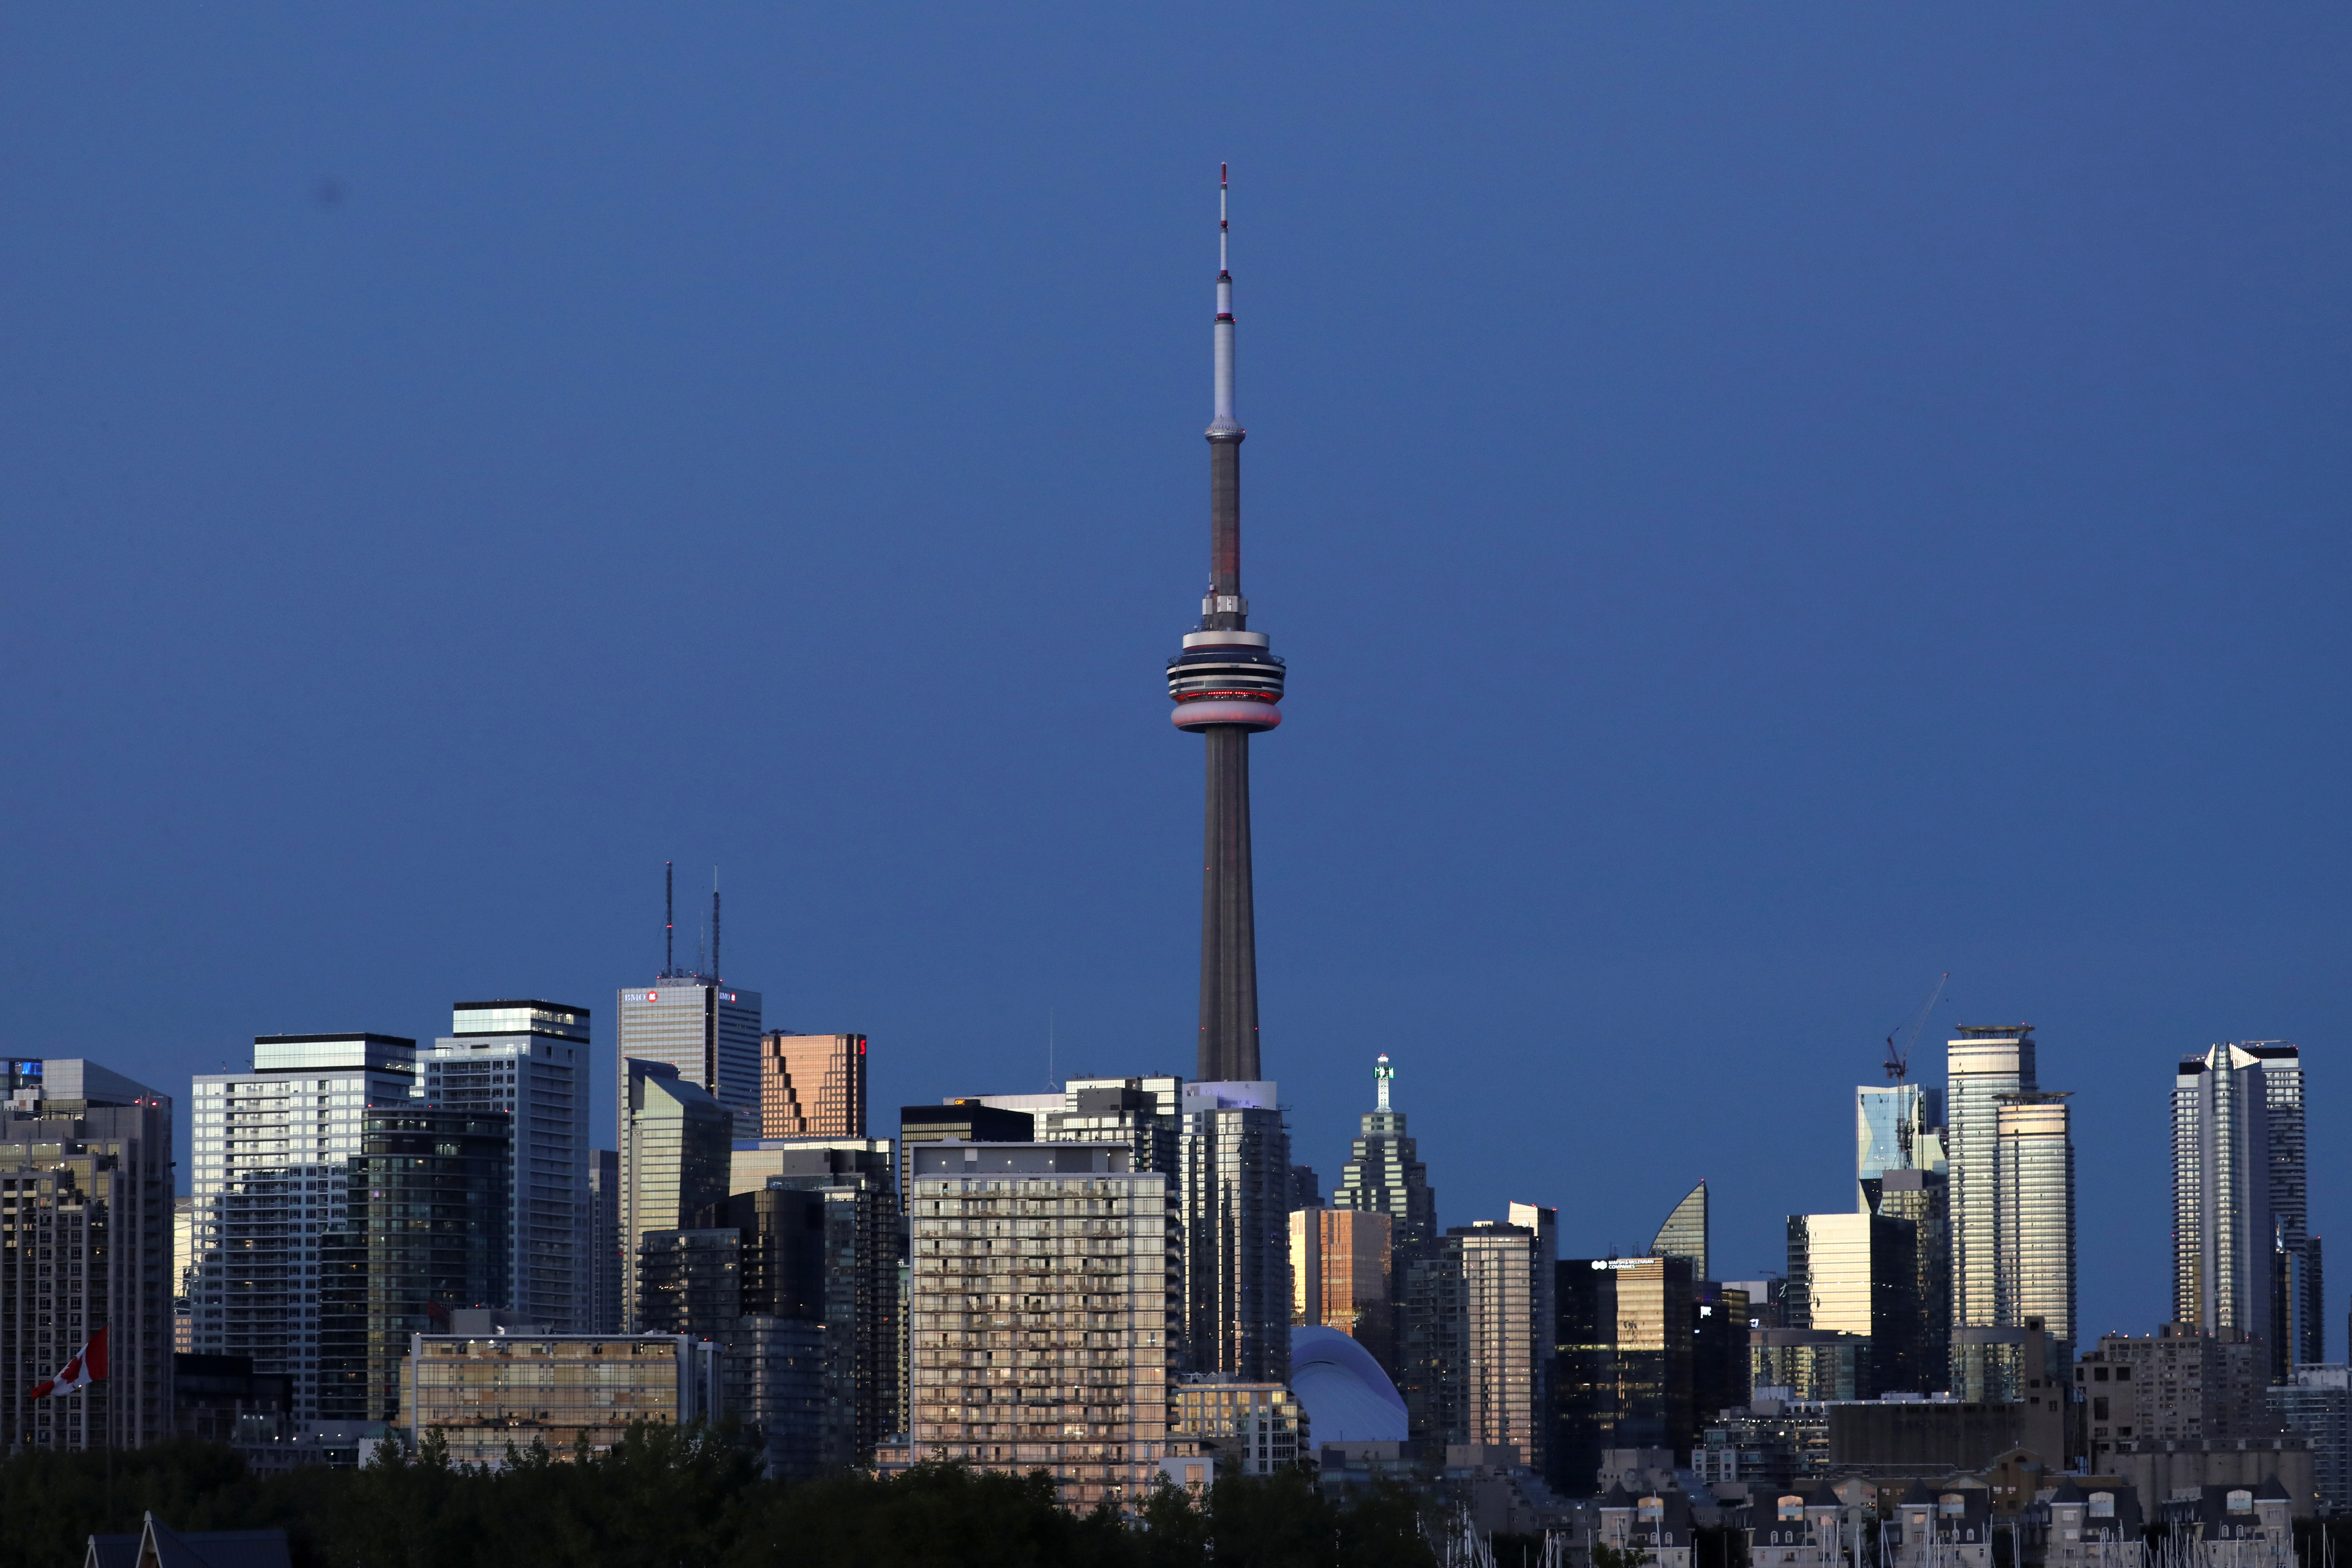 The CN Tower stands at dusk above office buildings and condominiums in the downtown core of Toronto